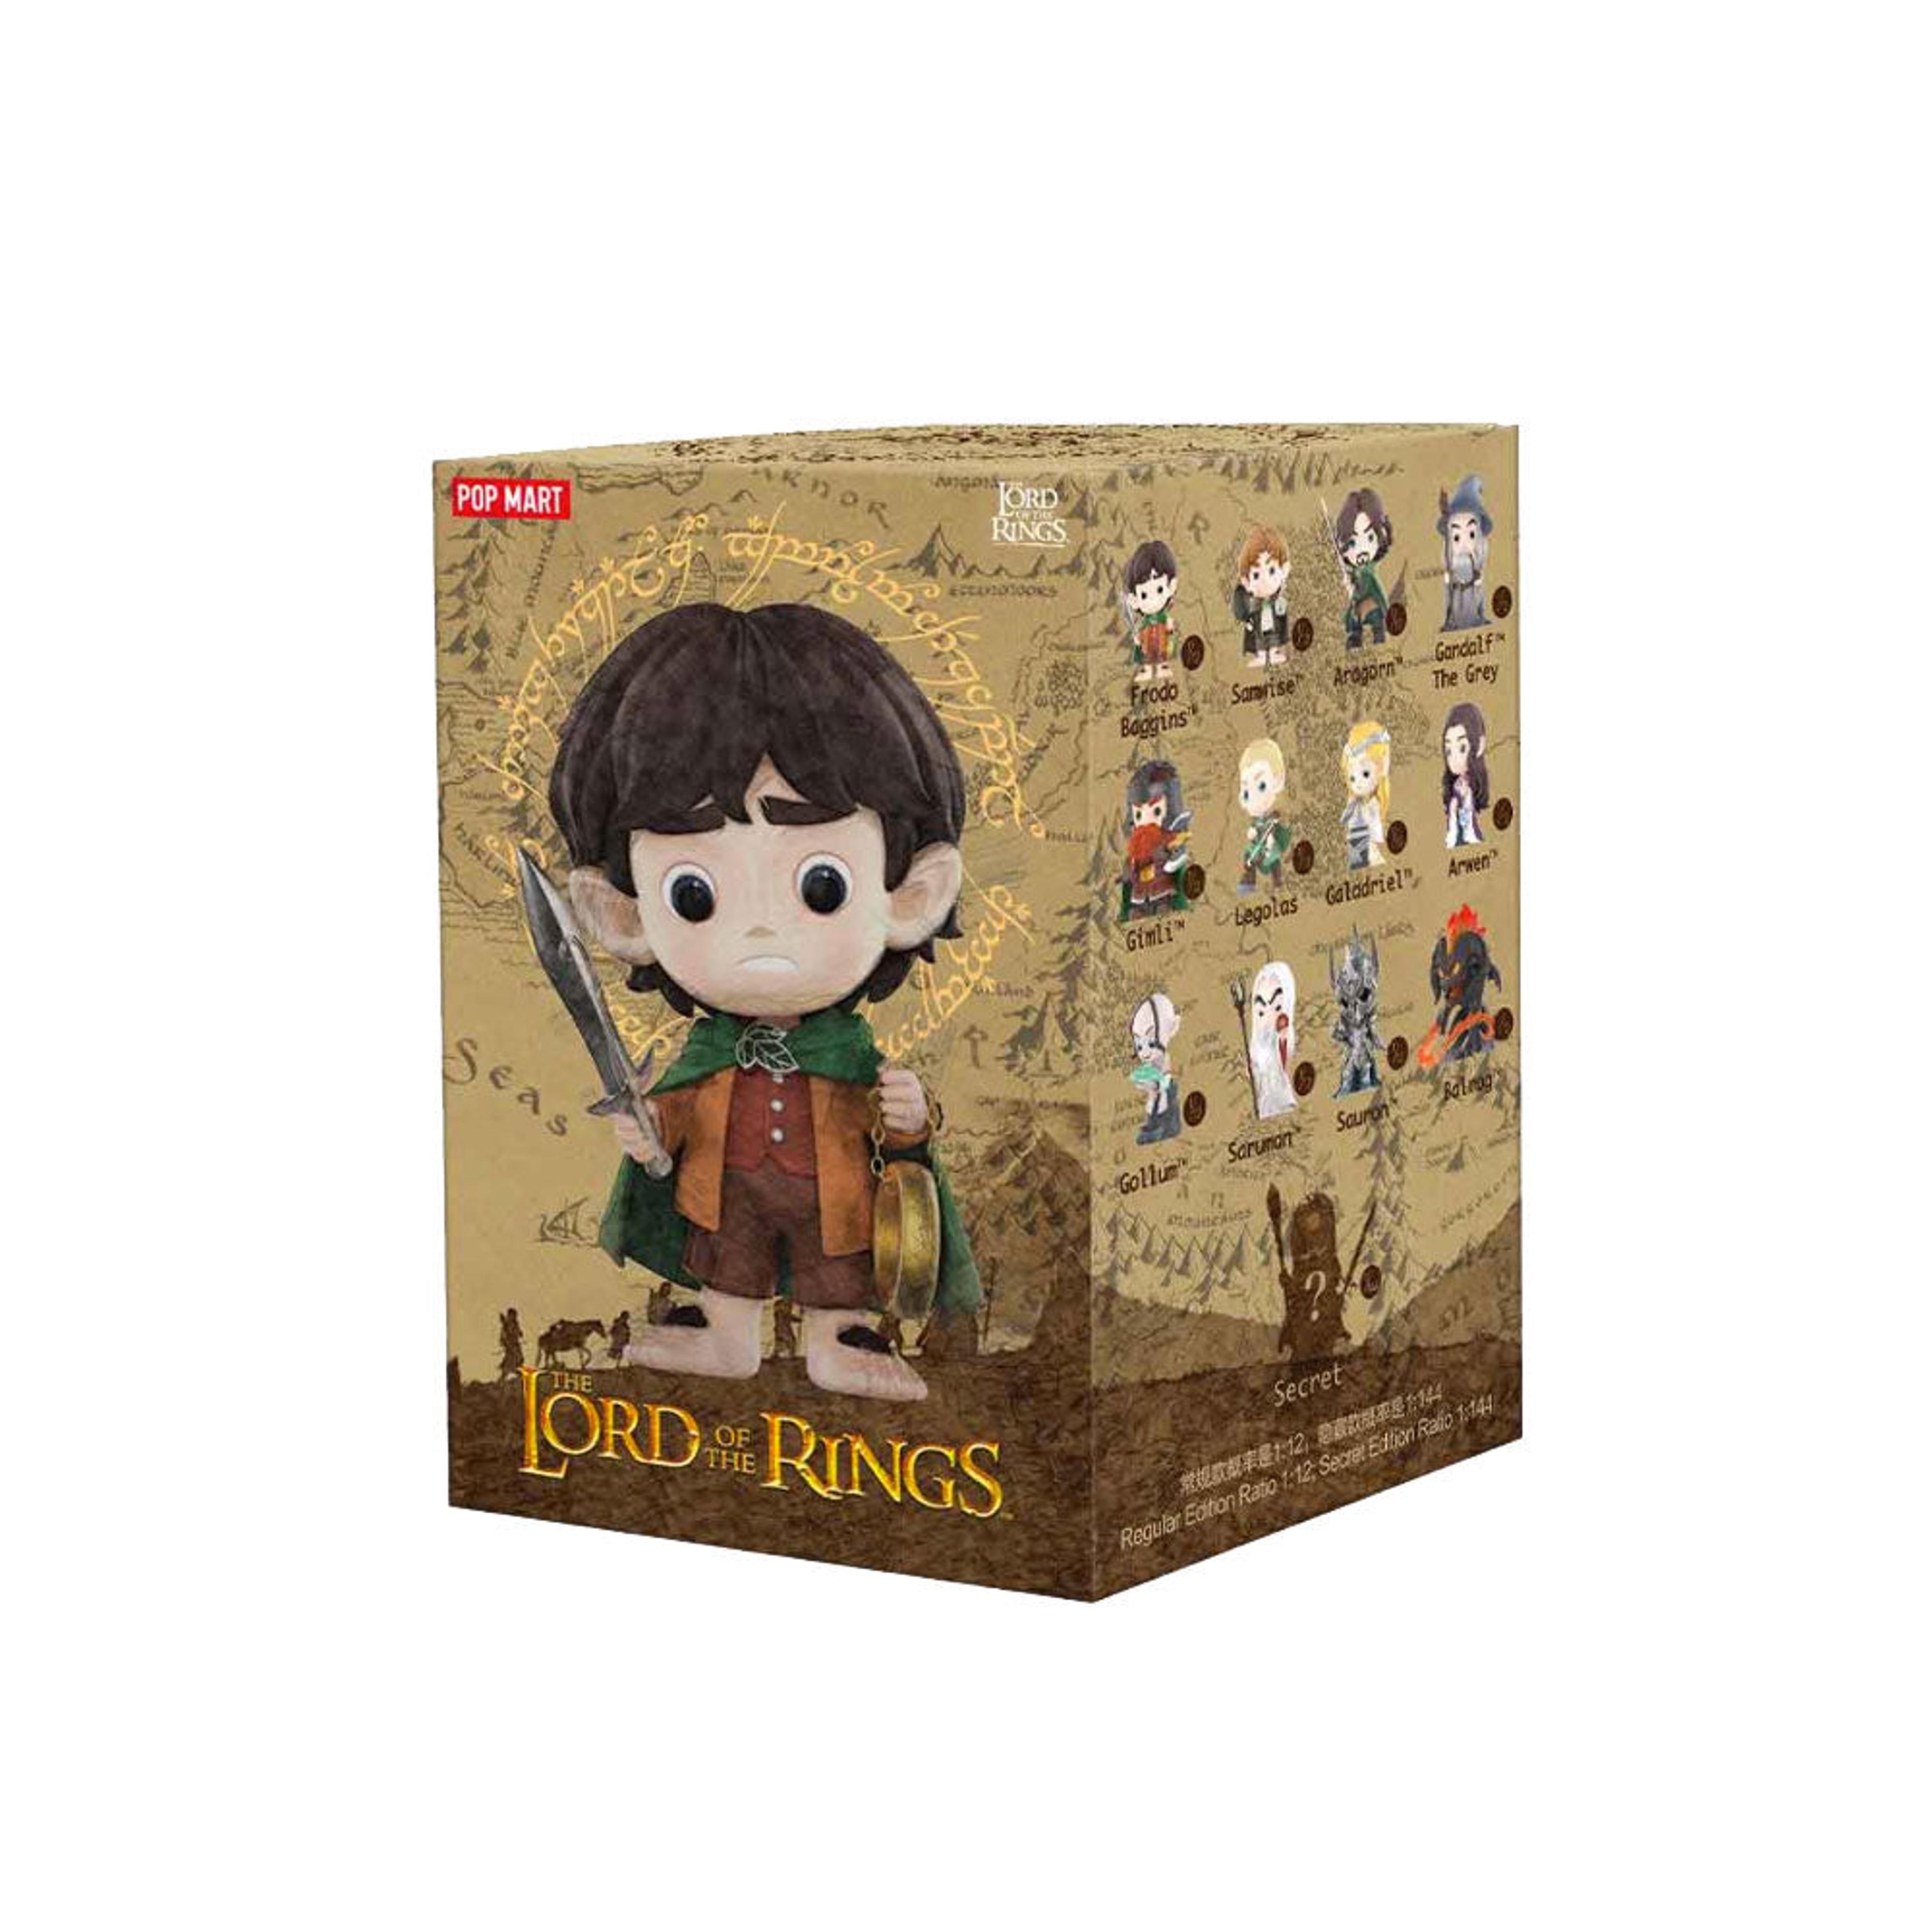 Alternate View 1 of The Lord of the Rings Classic Series Blind Box by POP MART